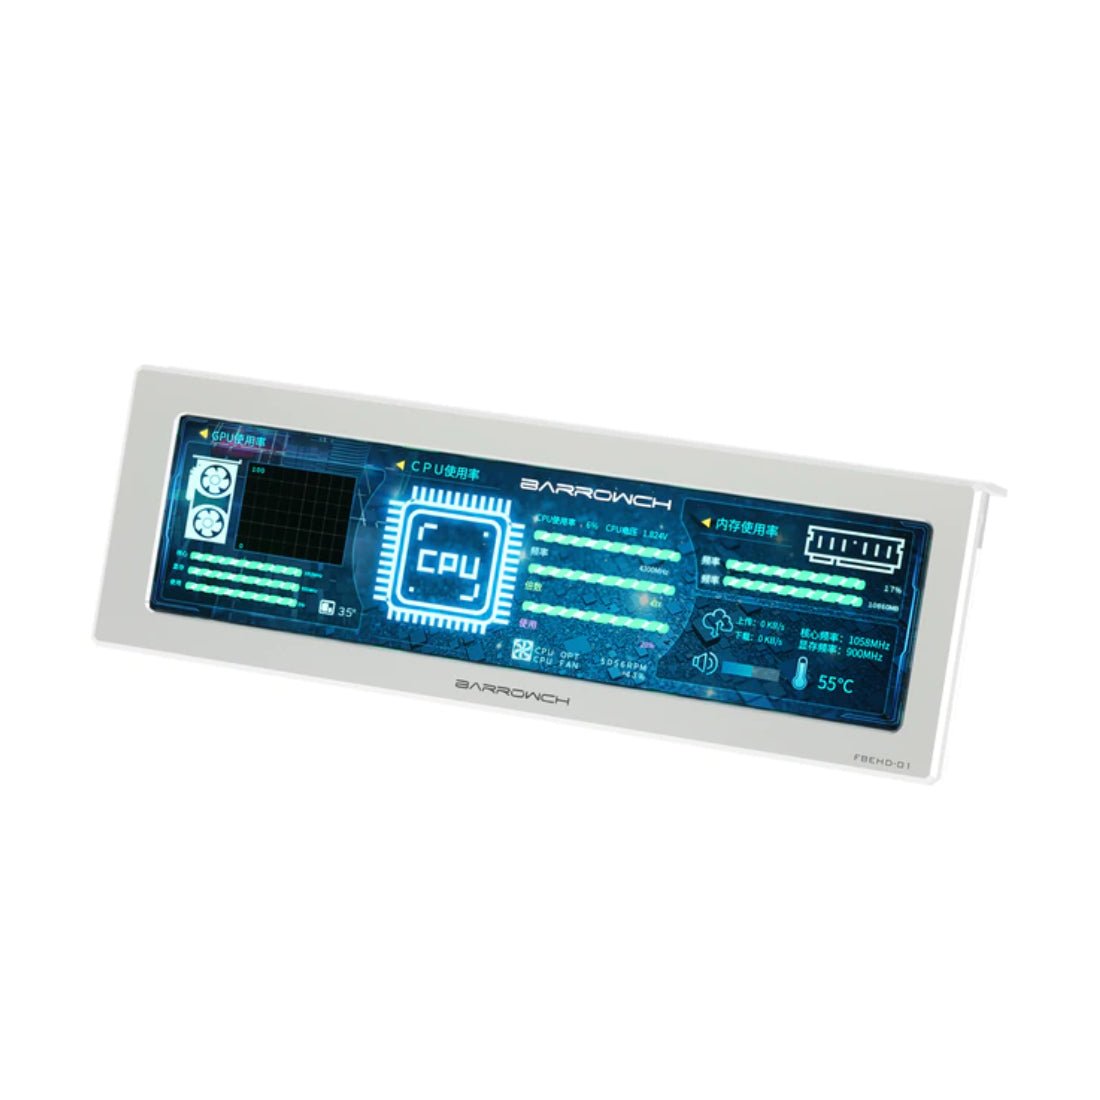 Barrowch 250mm IPS High Definition System Monitoring LCD Display - Silver - Store 974 | ستور ٩٧٤